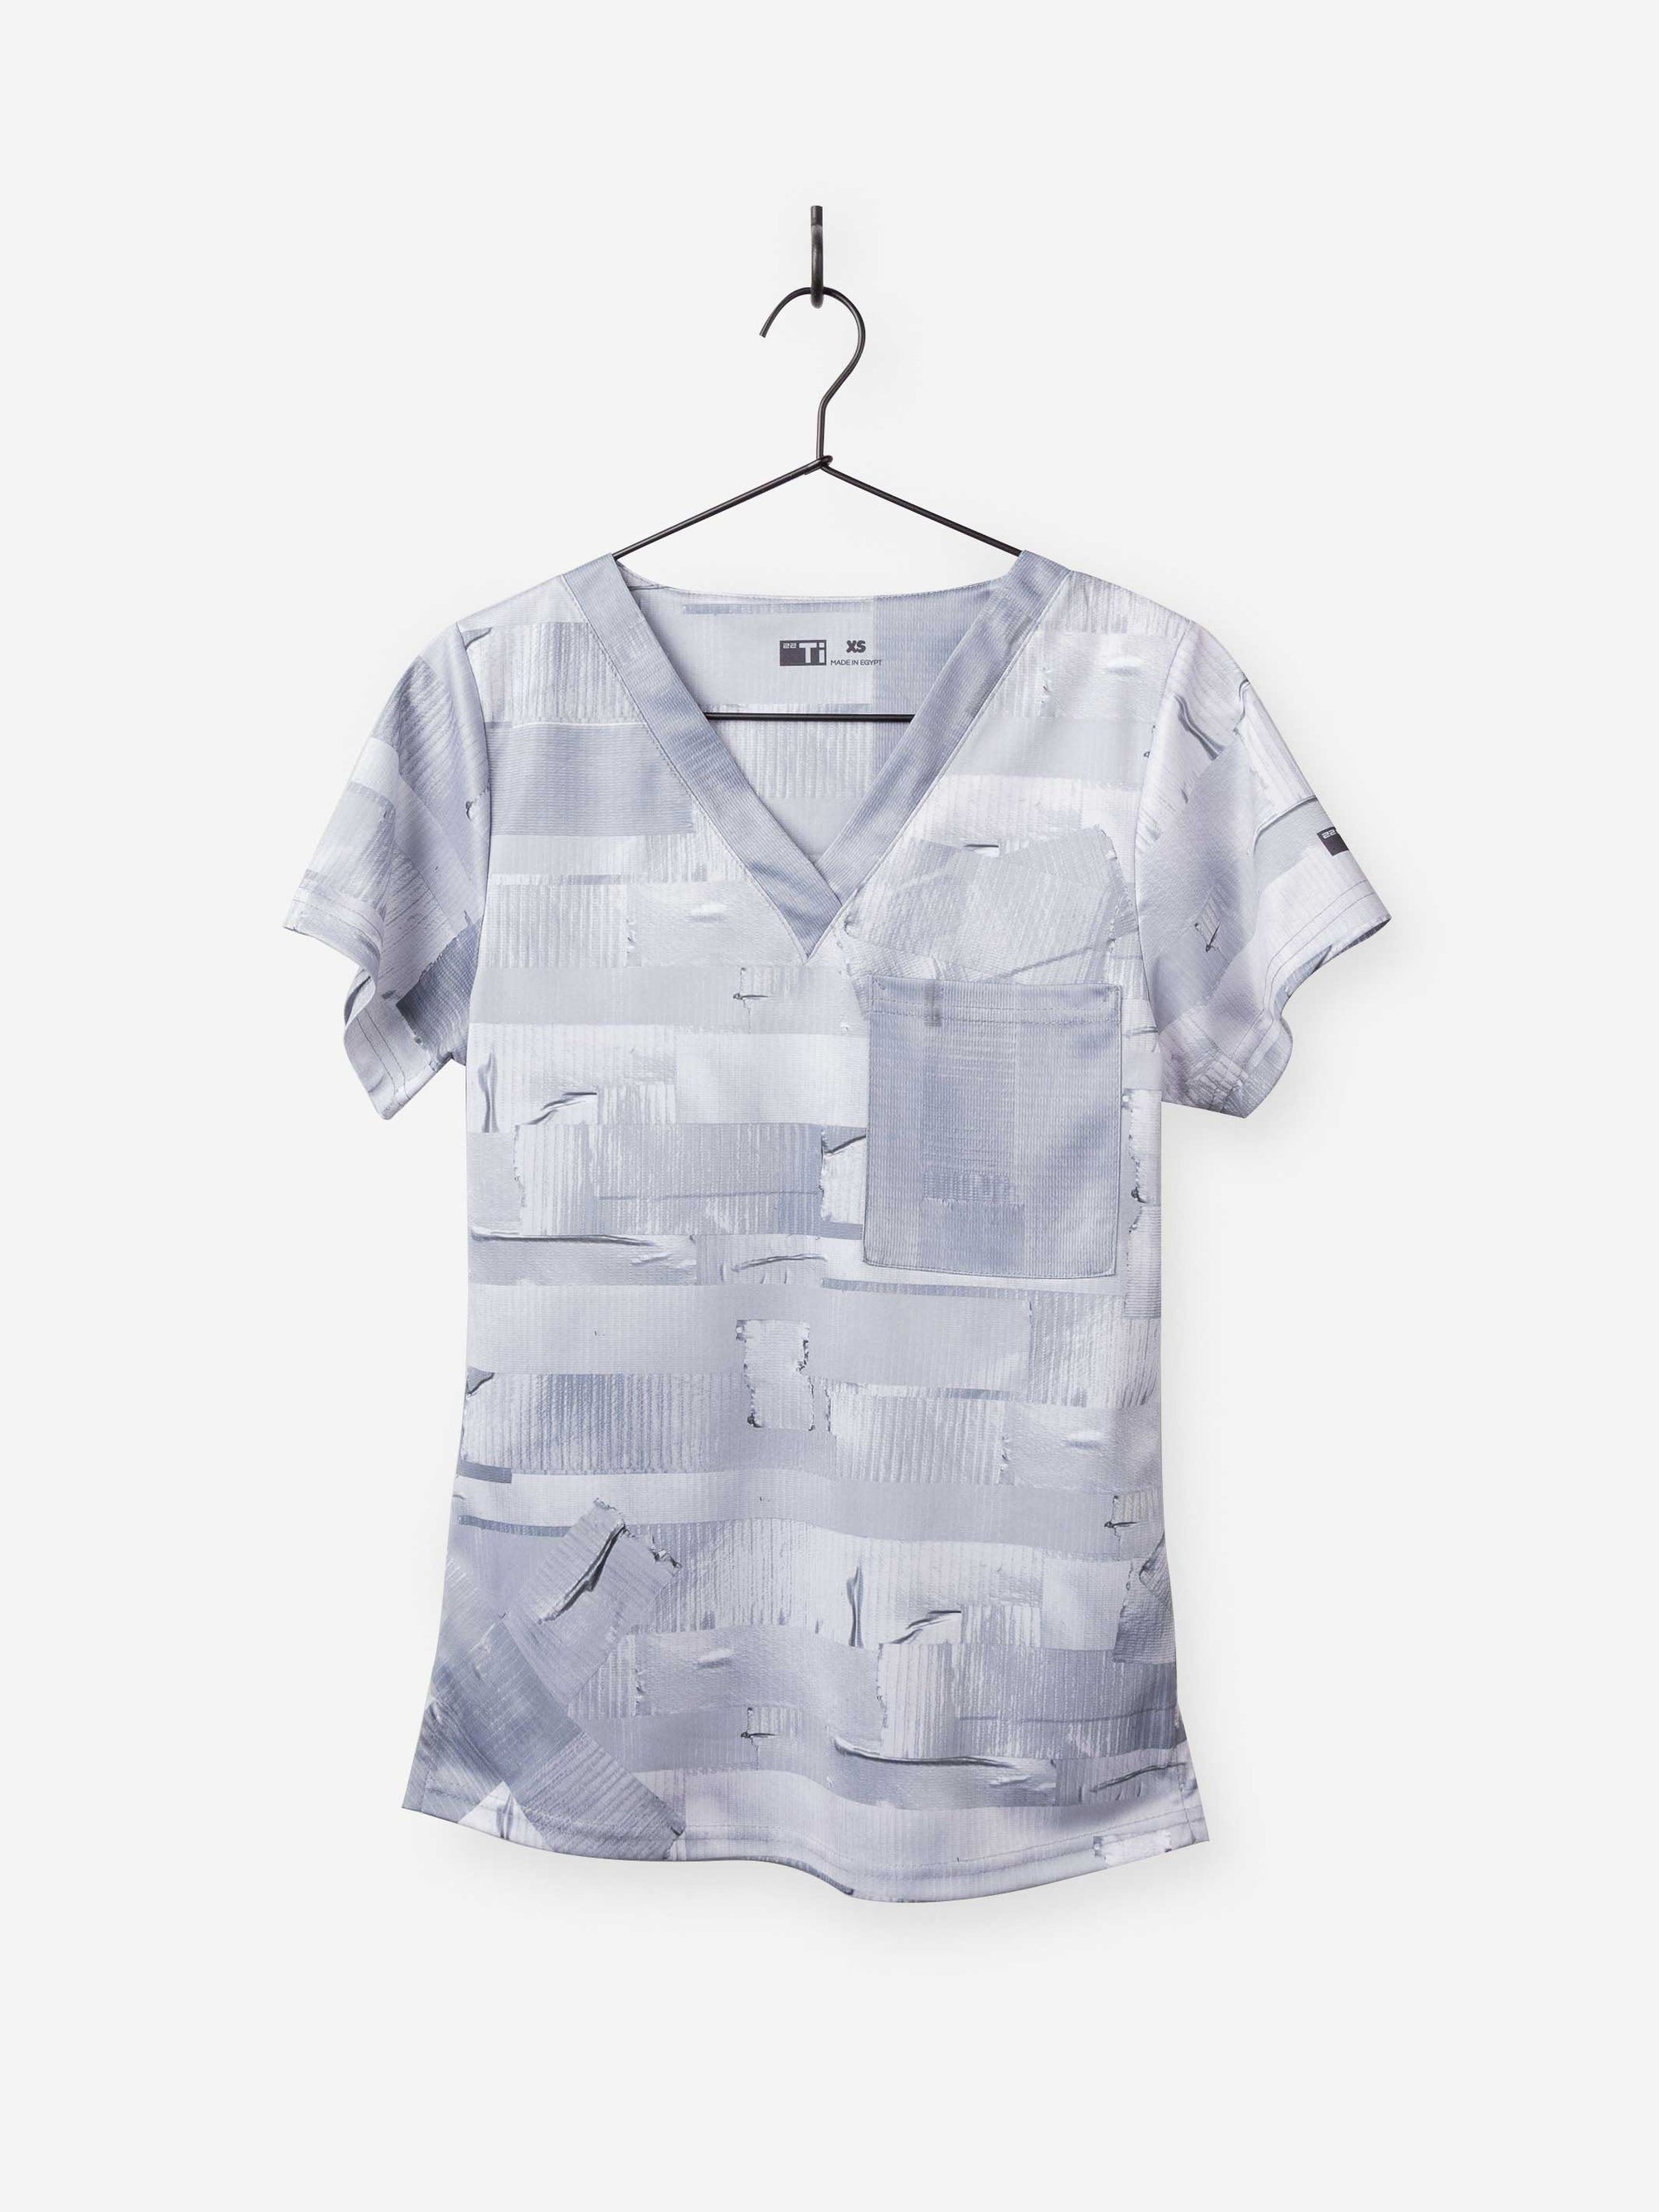 Women's Duct Tape Print Scrub top with one pocket